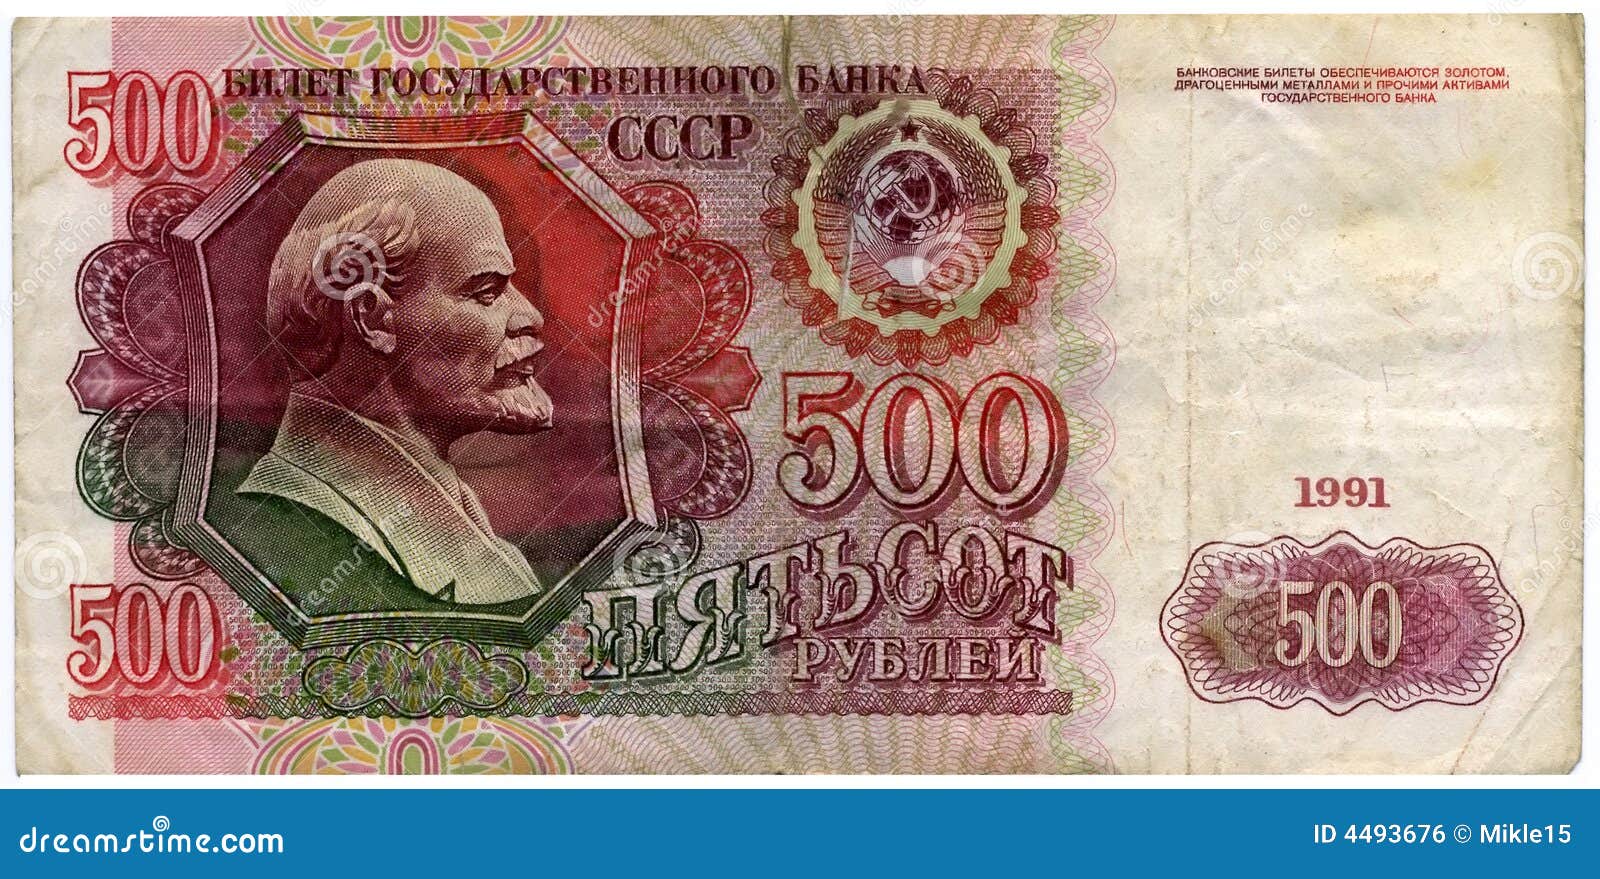 500 rouble banknote